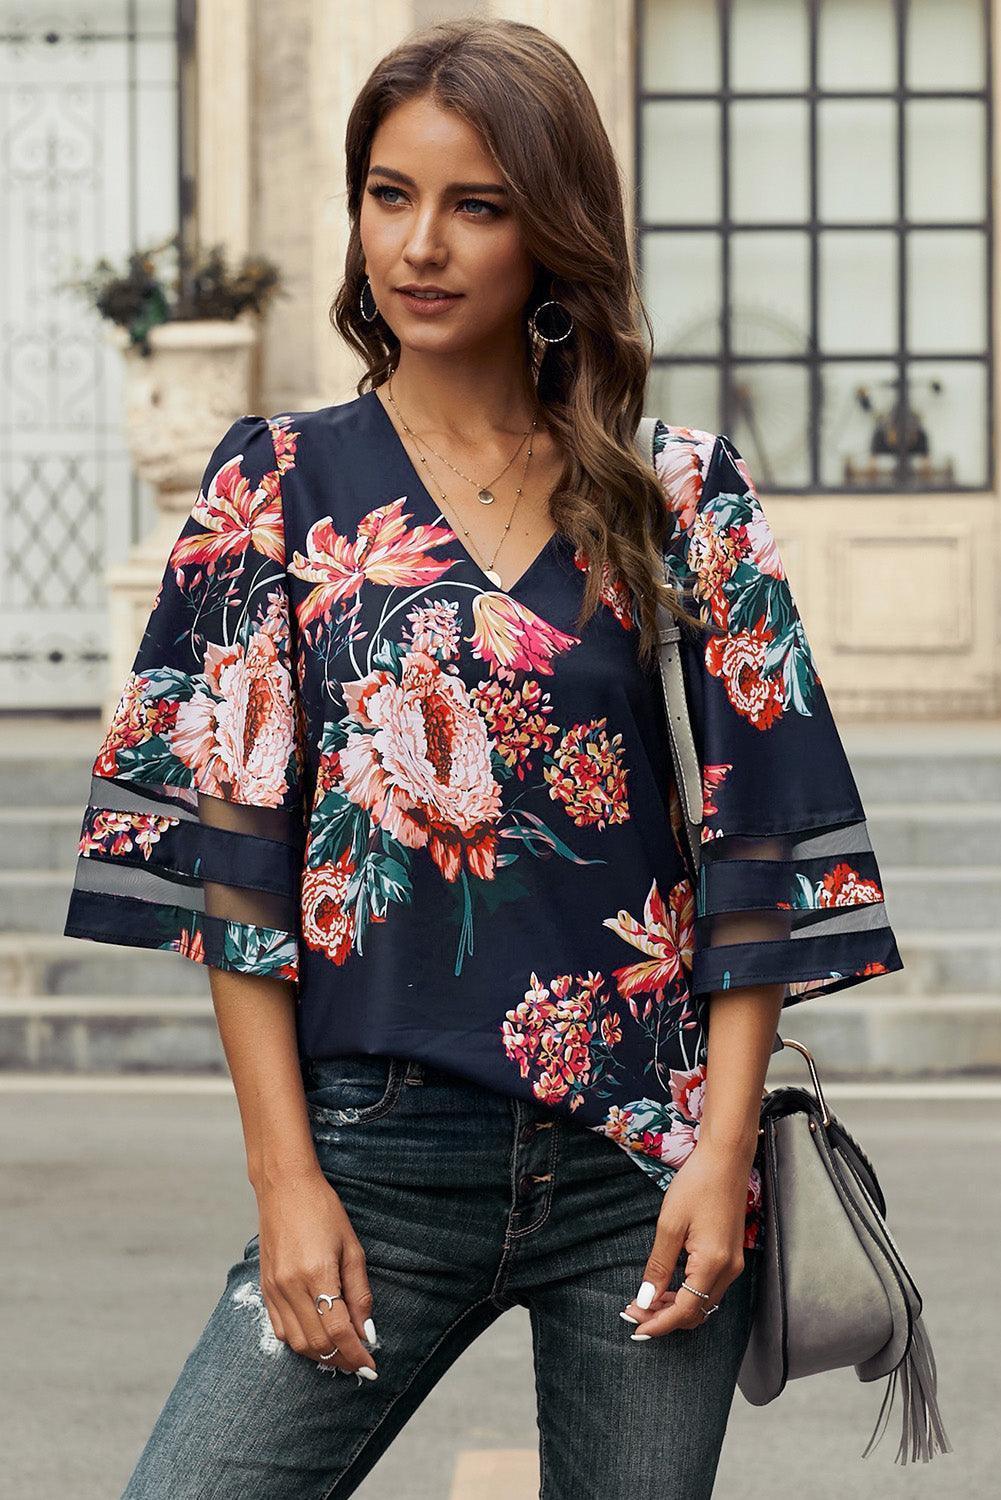 Instagrammable Floral Flare Sleeve Blouse - MXSTUDIO.COM